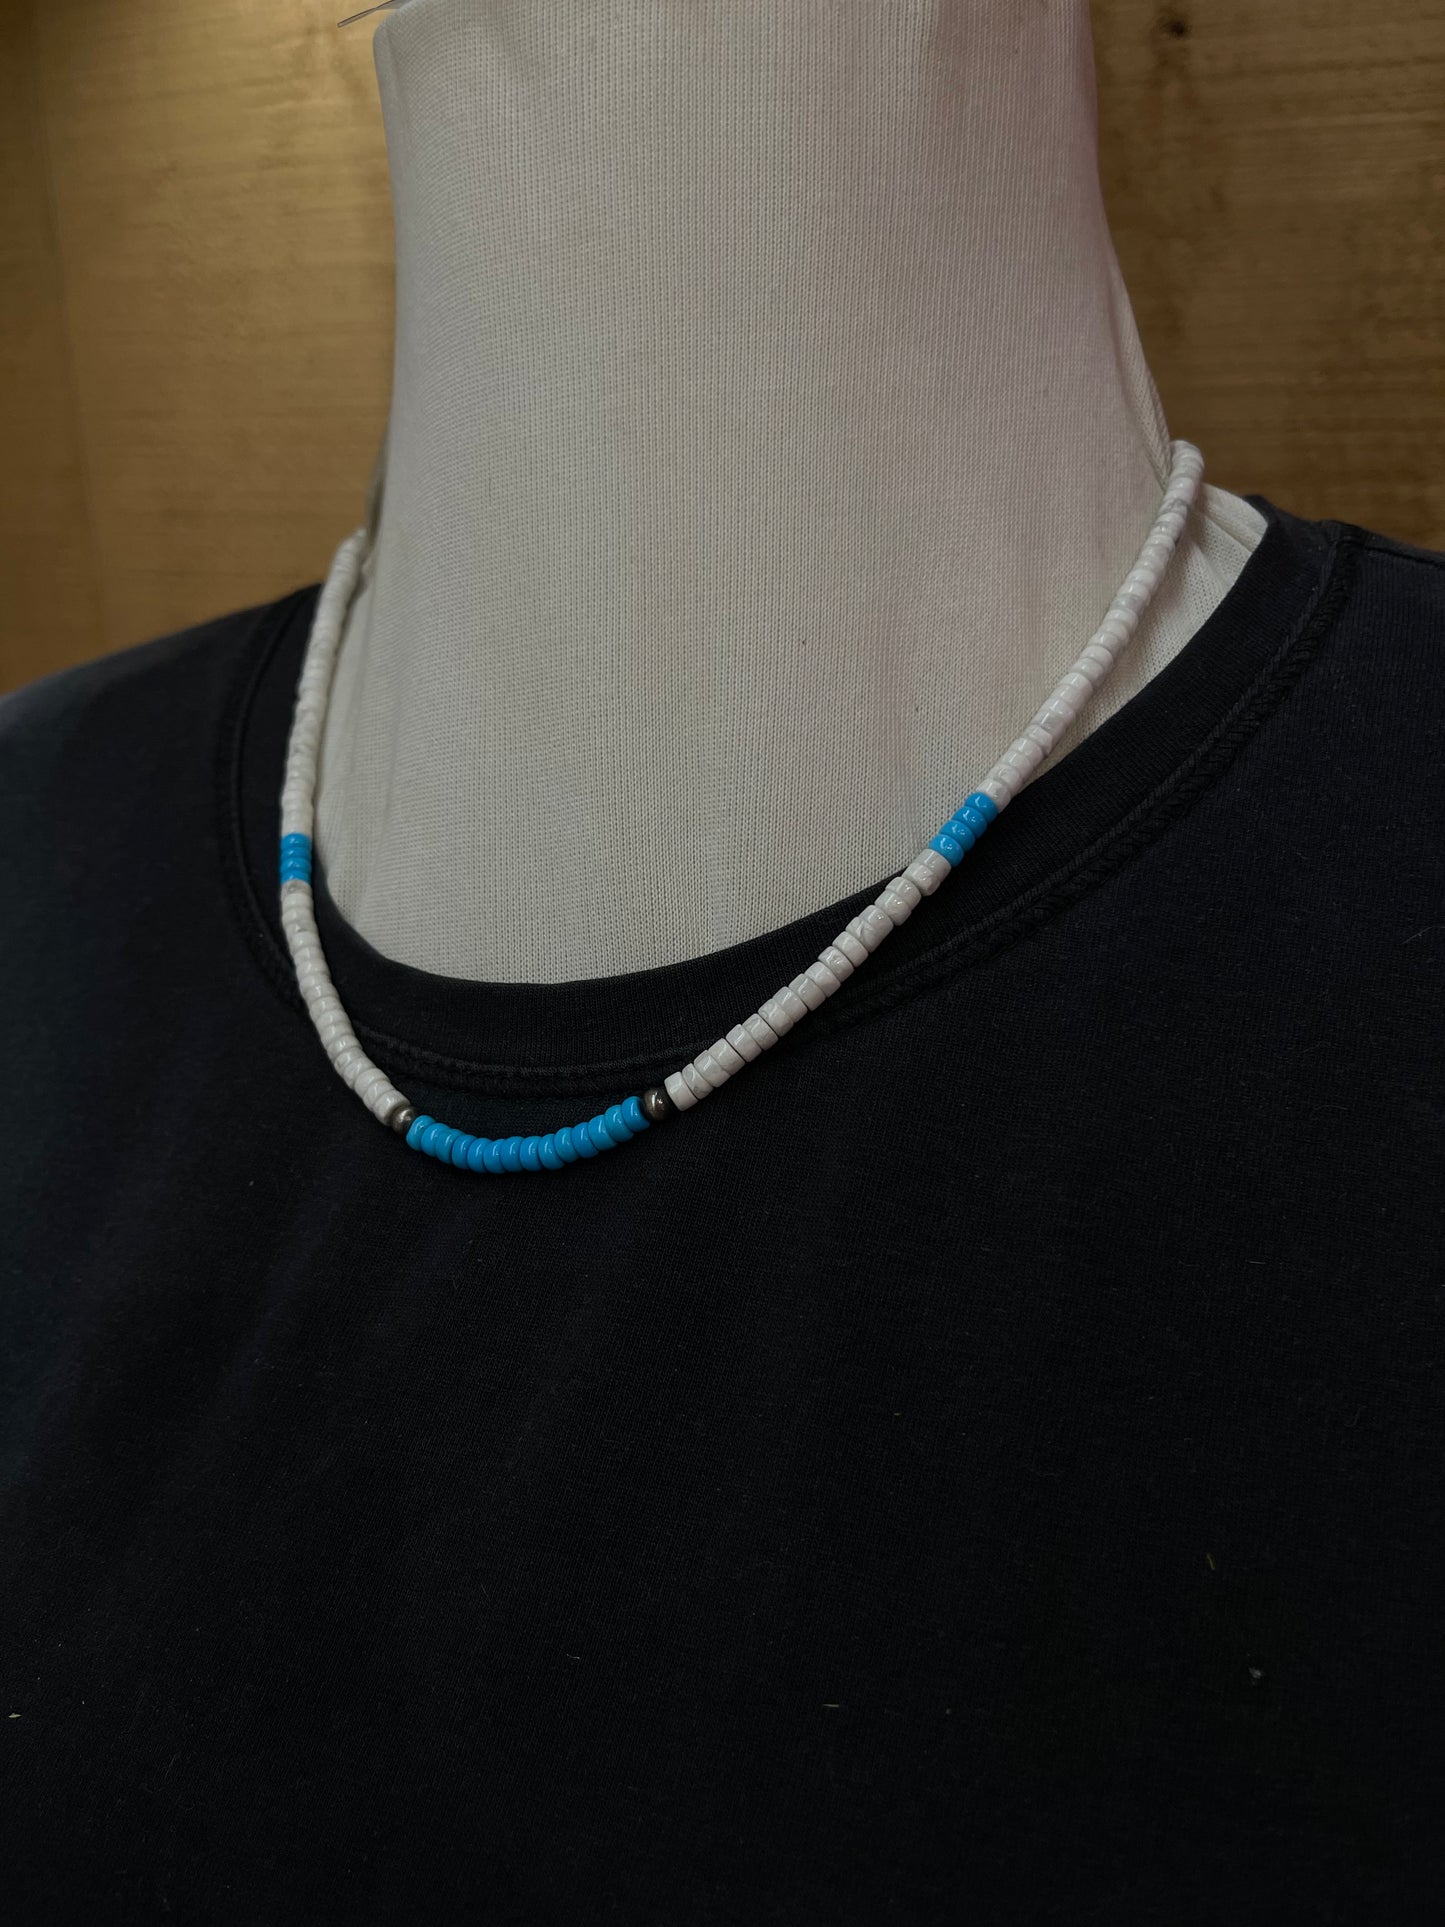 18" 4mm Howlite and Sleeping Beauty Turquoise Necklace